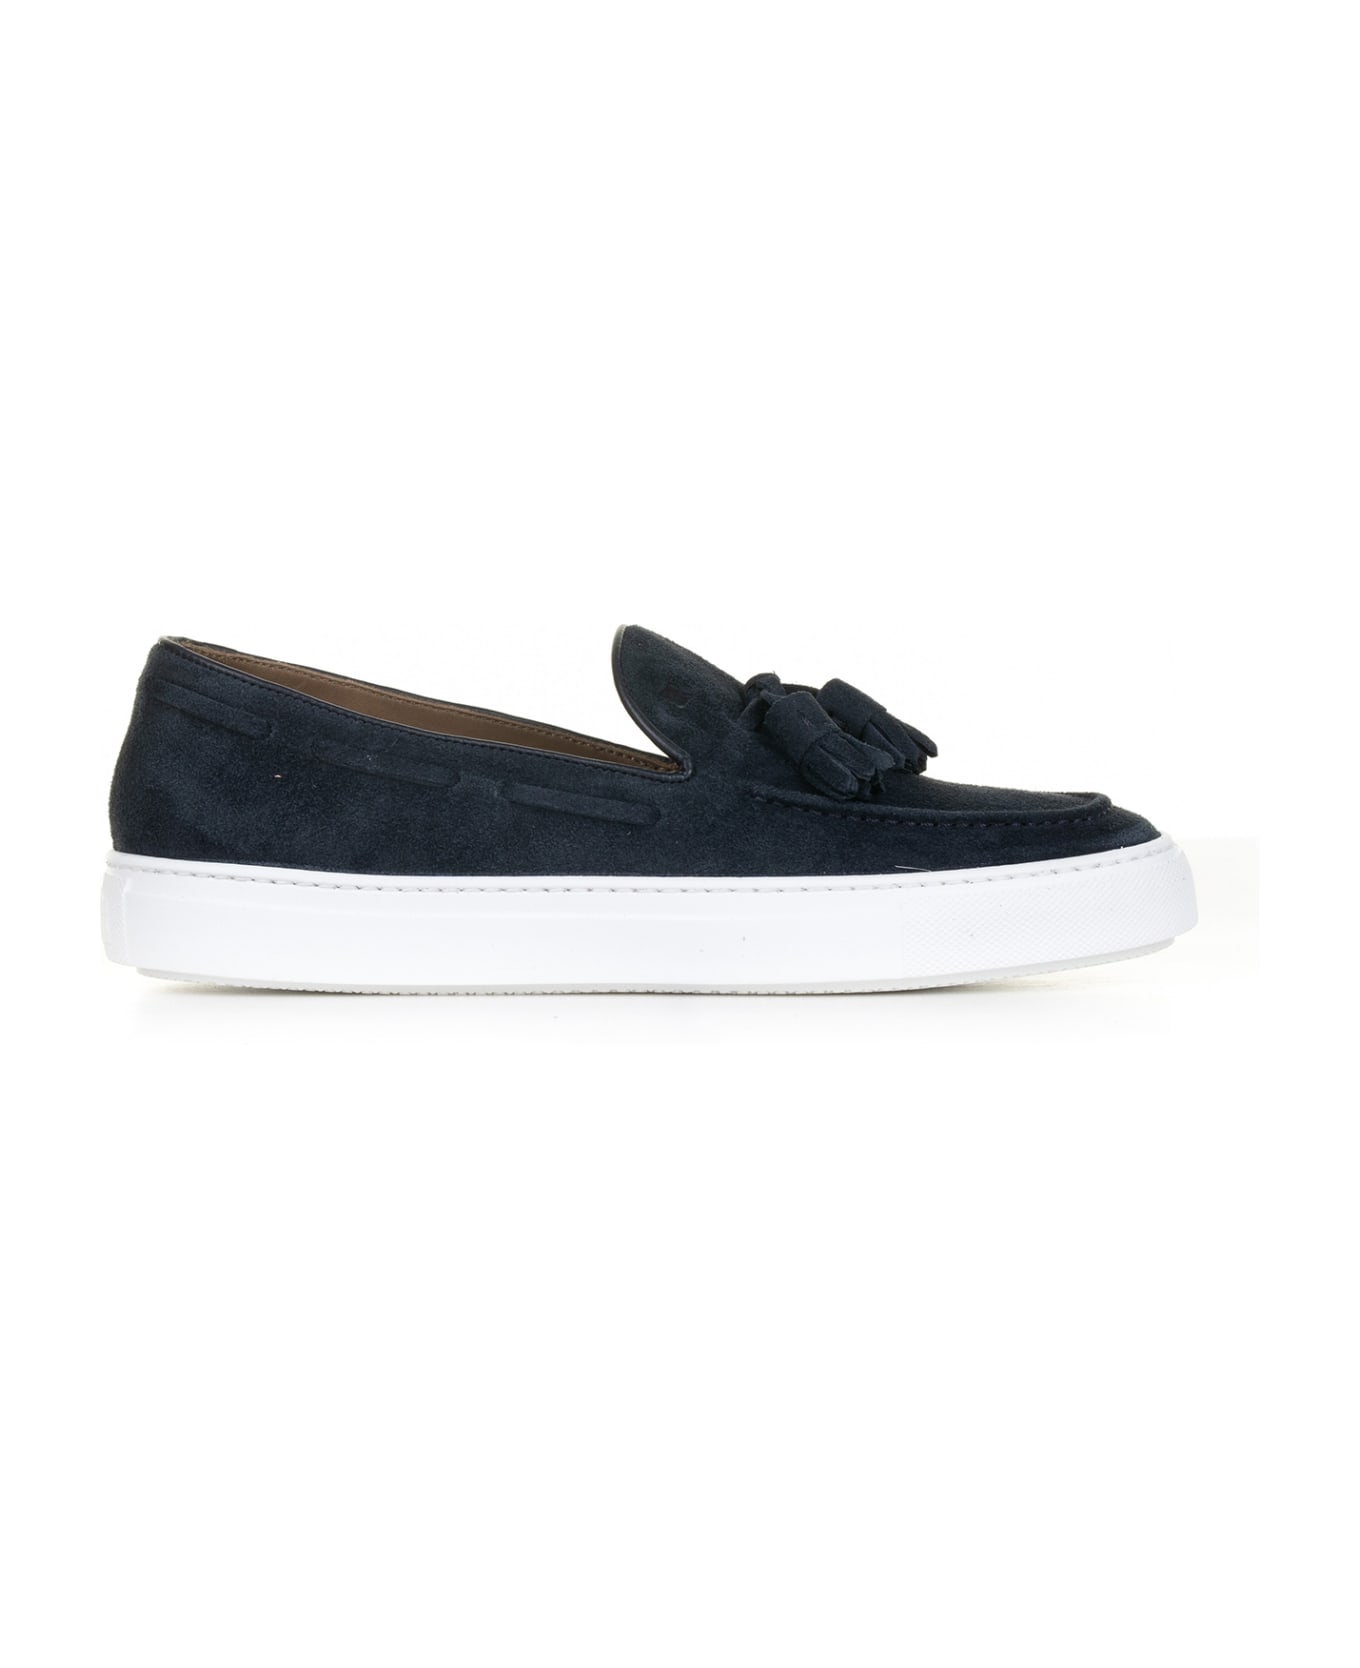 Fratelli Rossetti One Moccasin In Blue Suede And Rubber Sole - Blu